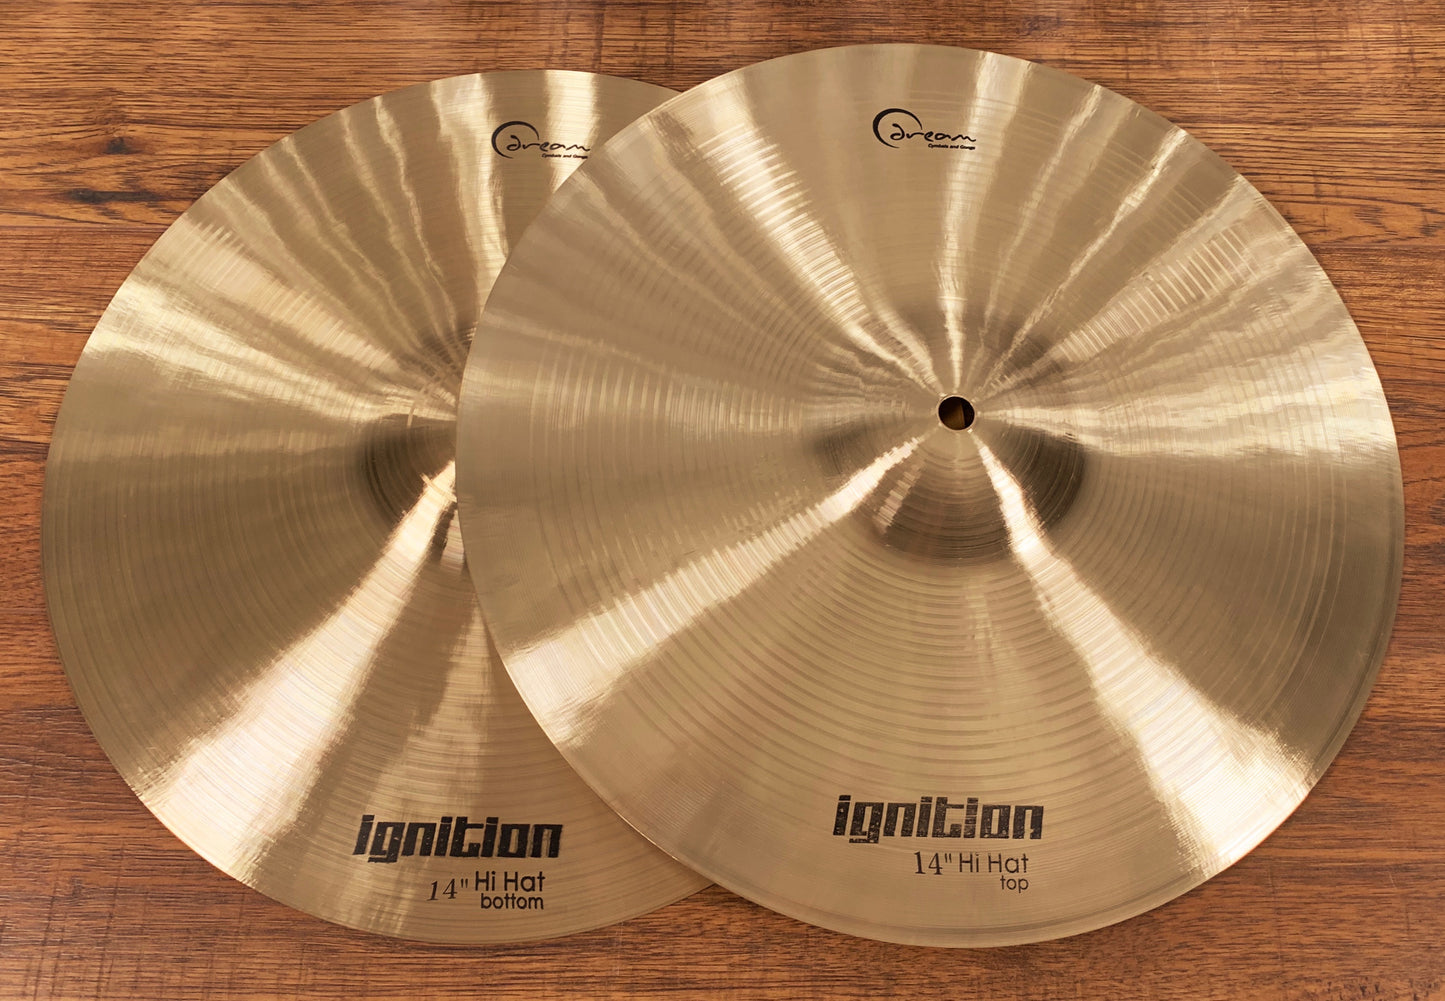 Dream Cymbals IGNCP4 Ignition Series 4 Piece Cymbal Pack & Bag Demo